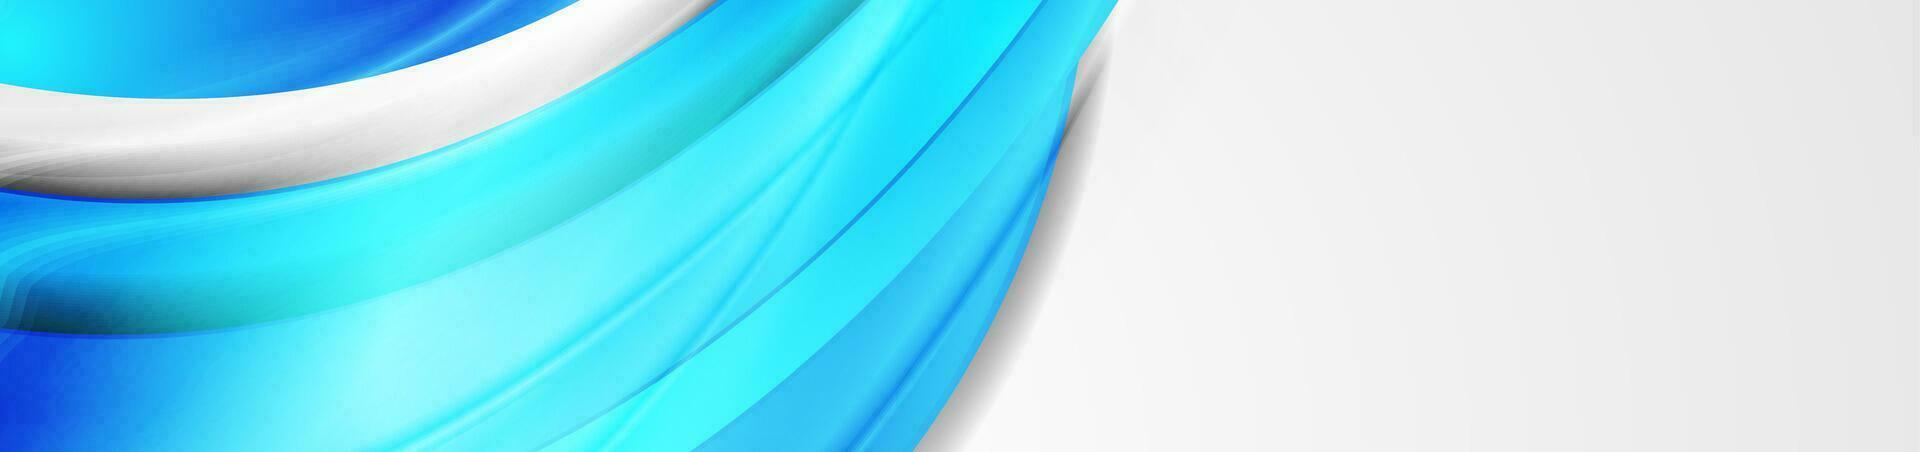 Bright blue shiny glossy waves abstract background vector